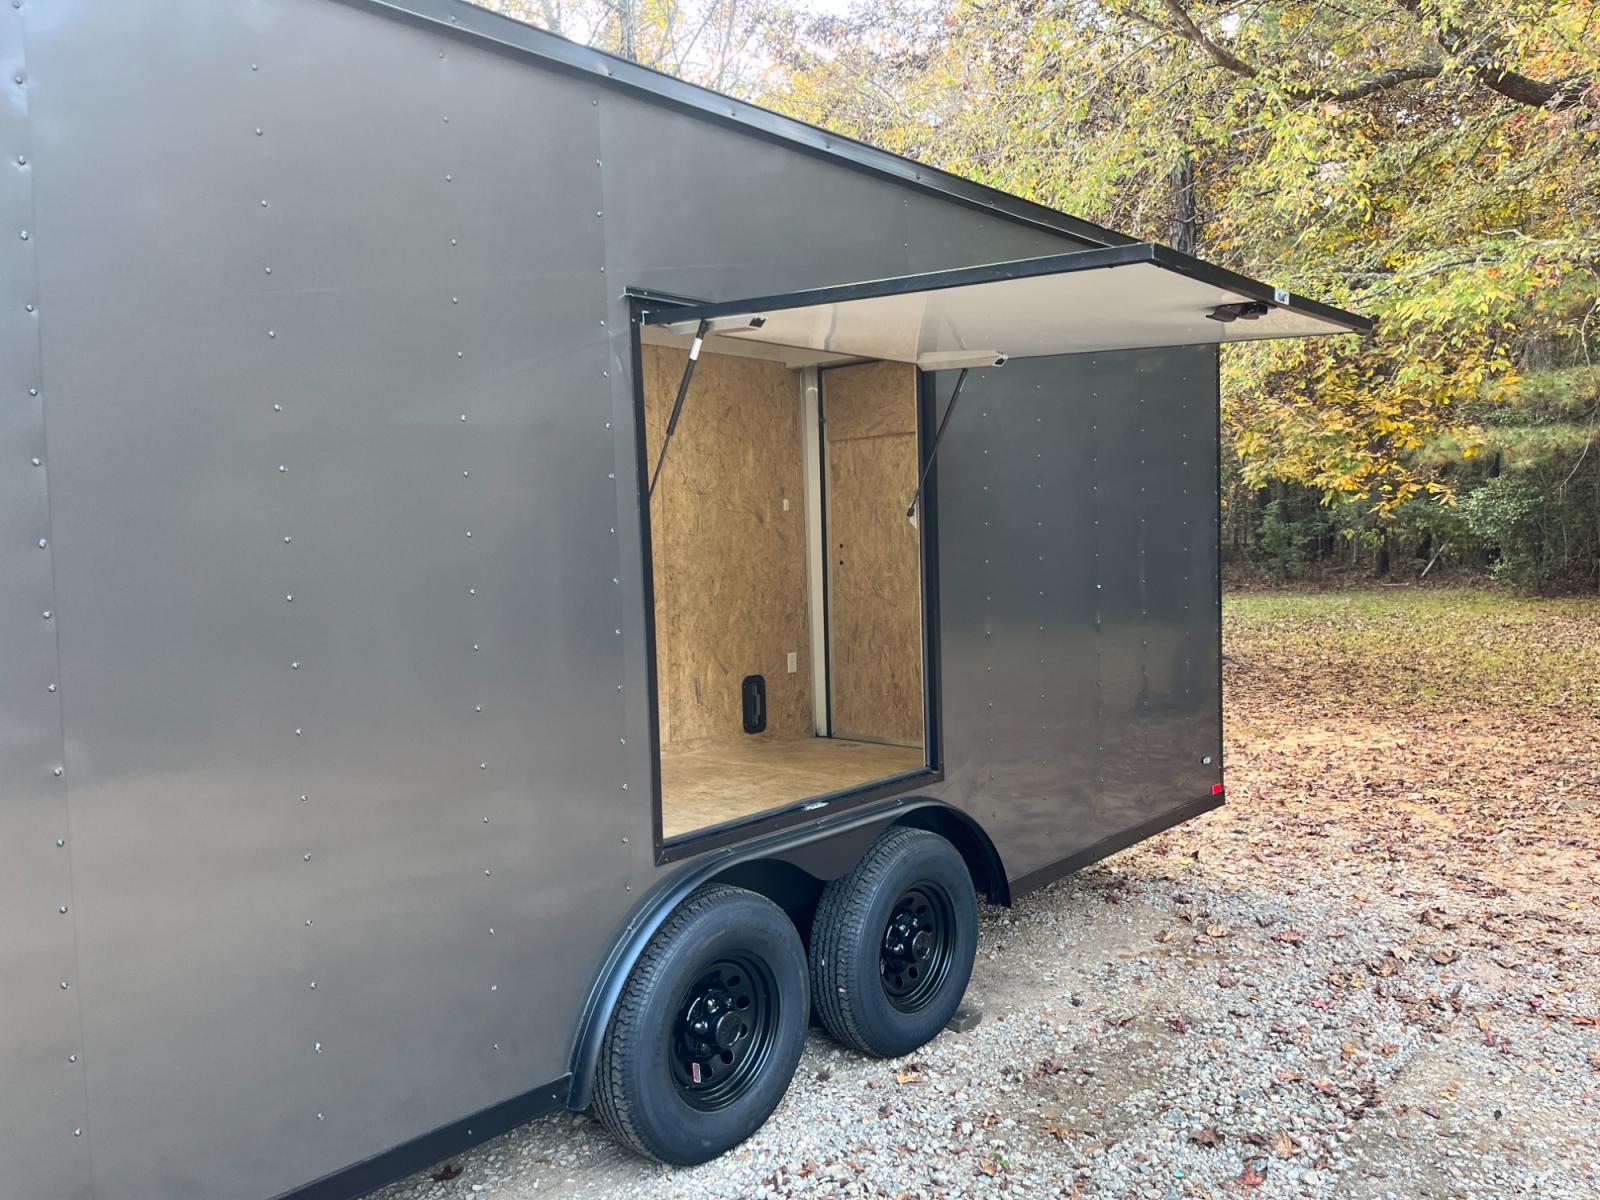 2023 .080 Charcoal Metallic w/Black Out Pkg. Elite Cargo 8.5ft X 24ft Tandem , located at 1330 Rainey Rd., Macon, 31220, (478) 960-1044, 32.845638, -83.778687 - Brand New 2023 Model Elite Cargo Trailer, Made Tifton, GA 7ft 4" Tall Inside Height, Air Conditioner, Insulated too! 15,500 BTU A/C Unit, 5 Inside LED Light Strips! Lights Up Really Bright Inside! This Deluxe Enclosed Car Hauler has Awesome Features! .080 Thick Charcoal Metallic Skin! Stunning - Photo #5